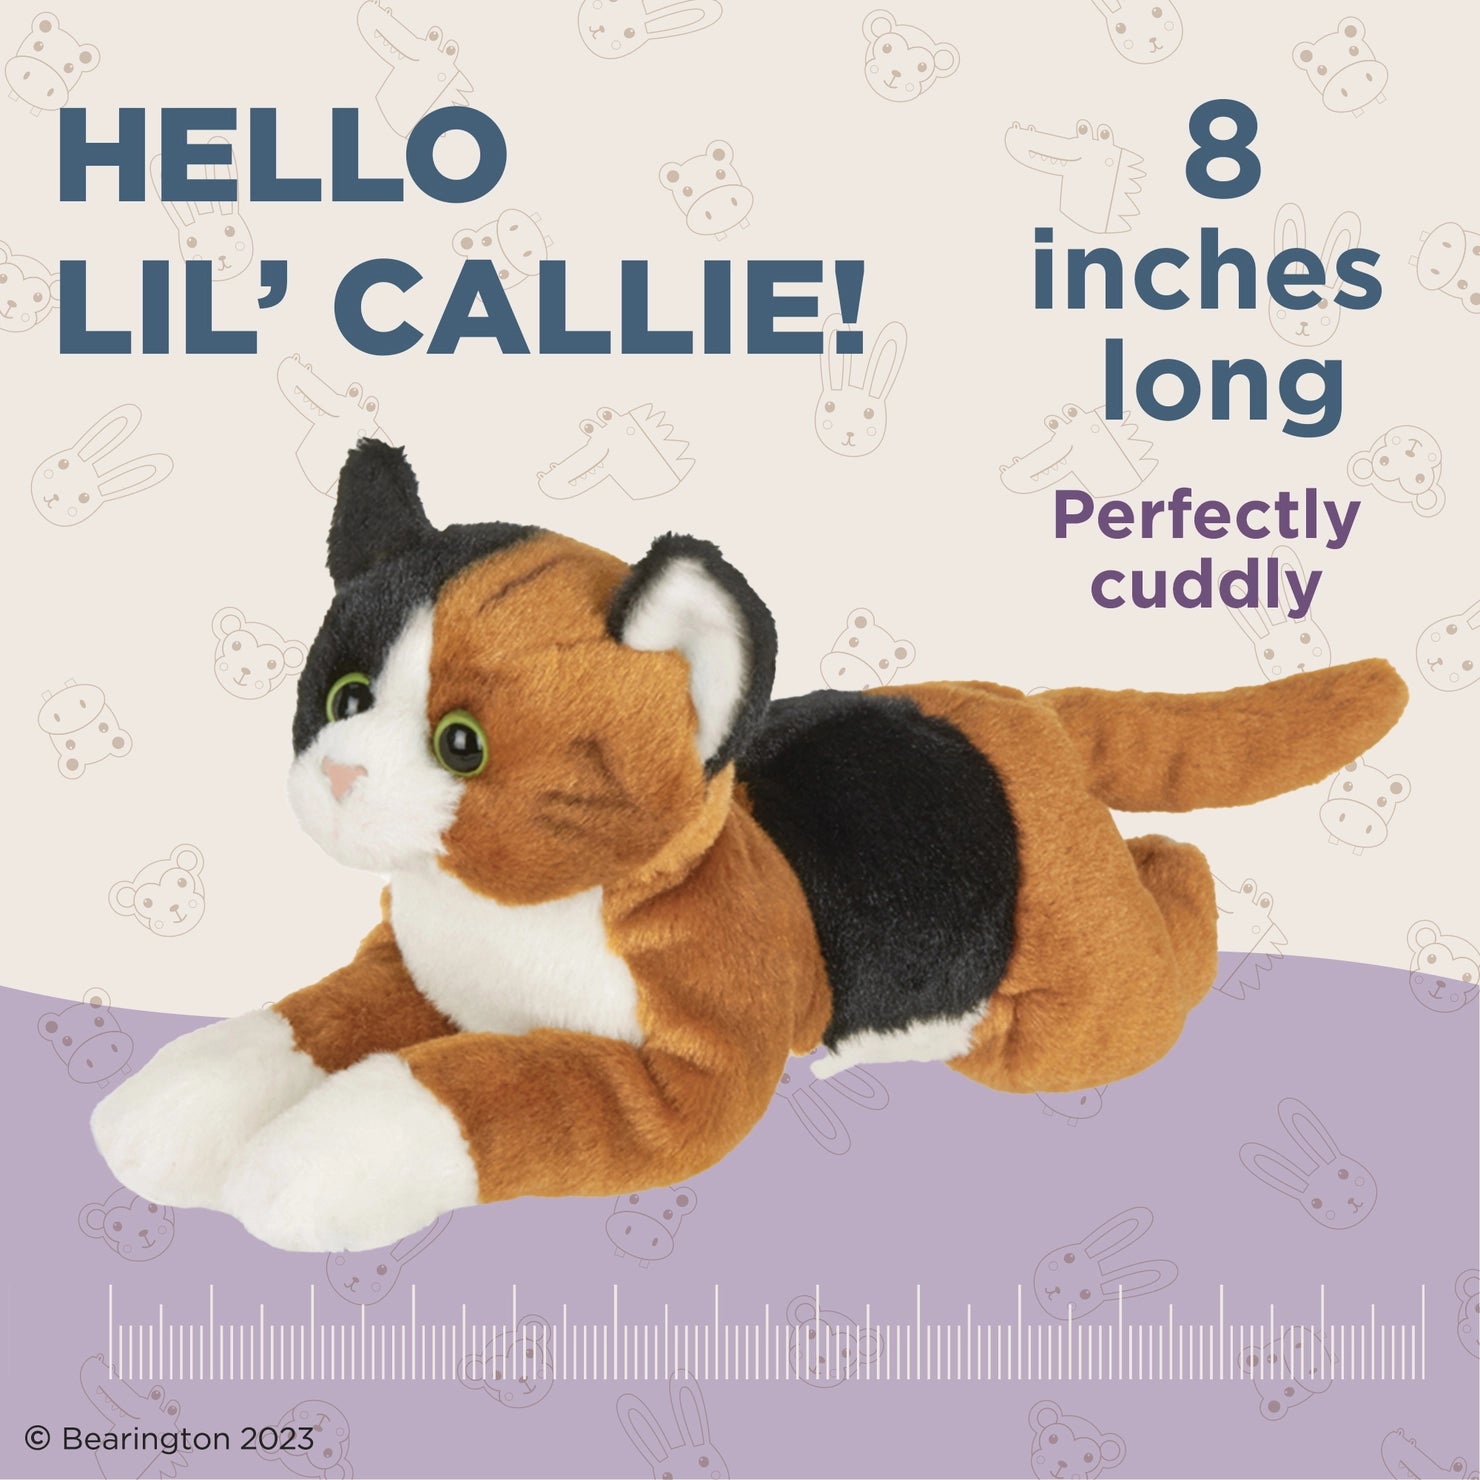 Bearington Collection - Lil' Callie the Calico Cat